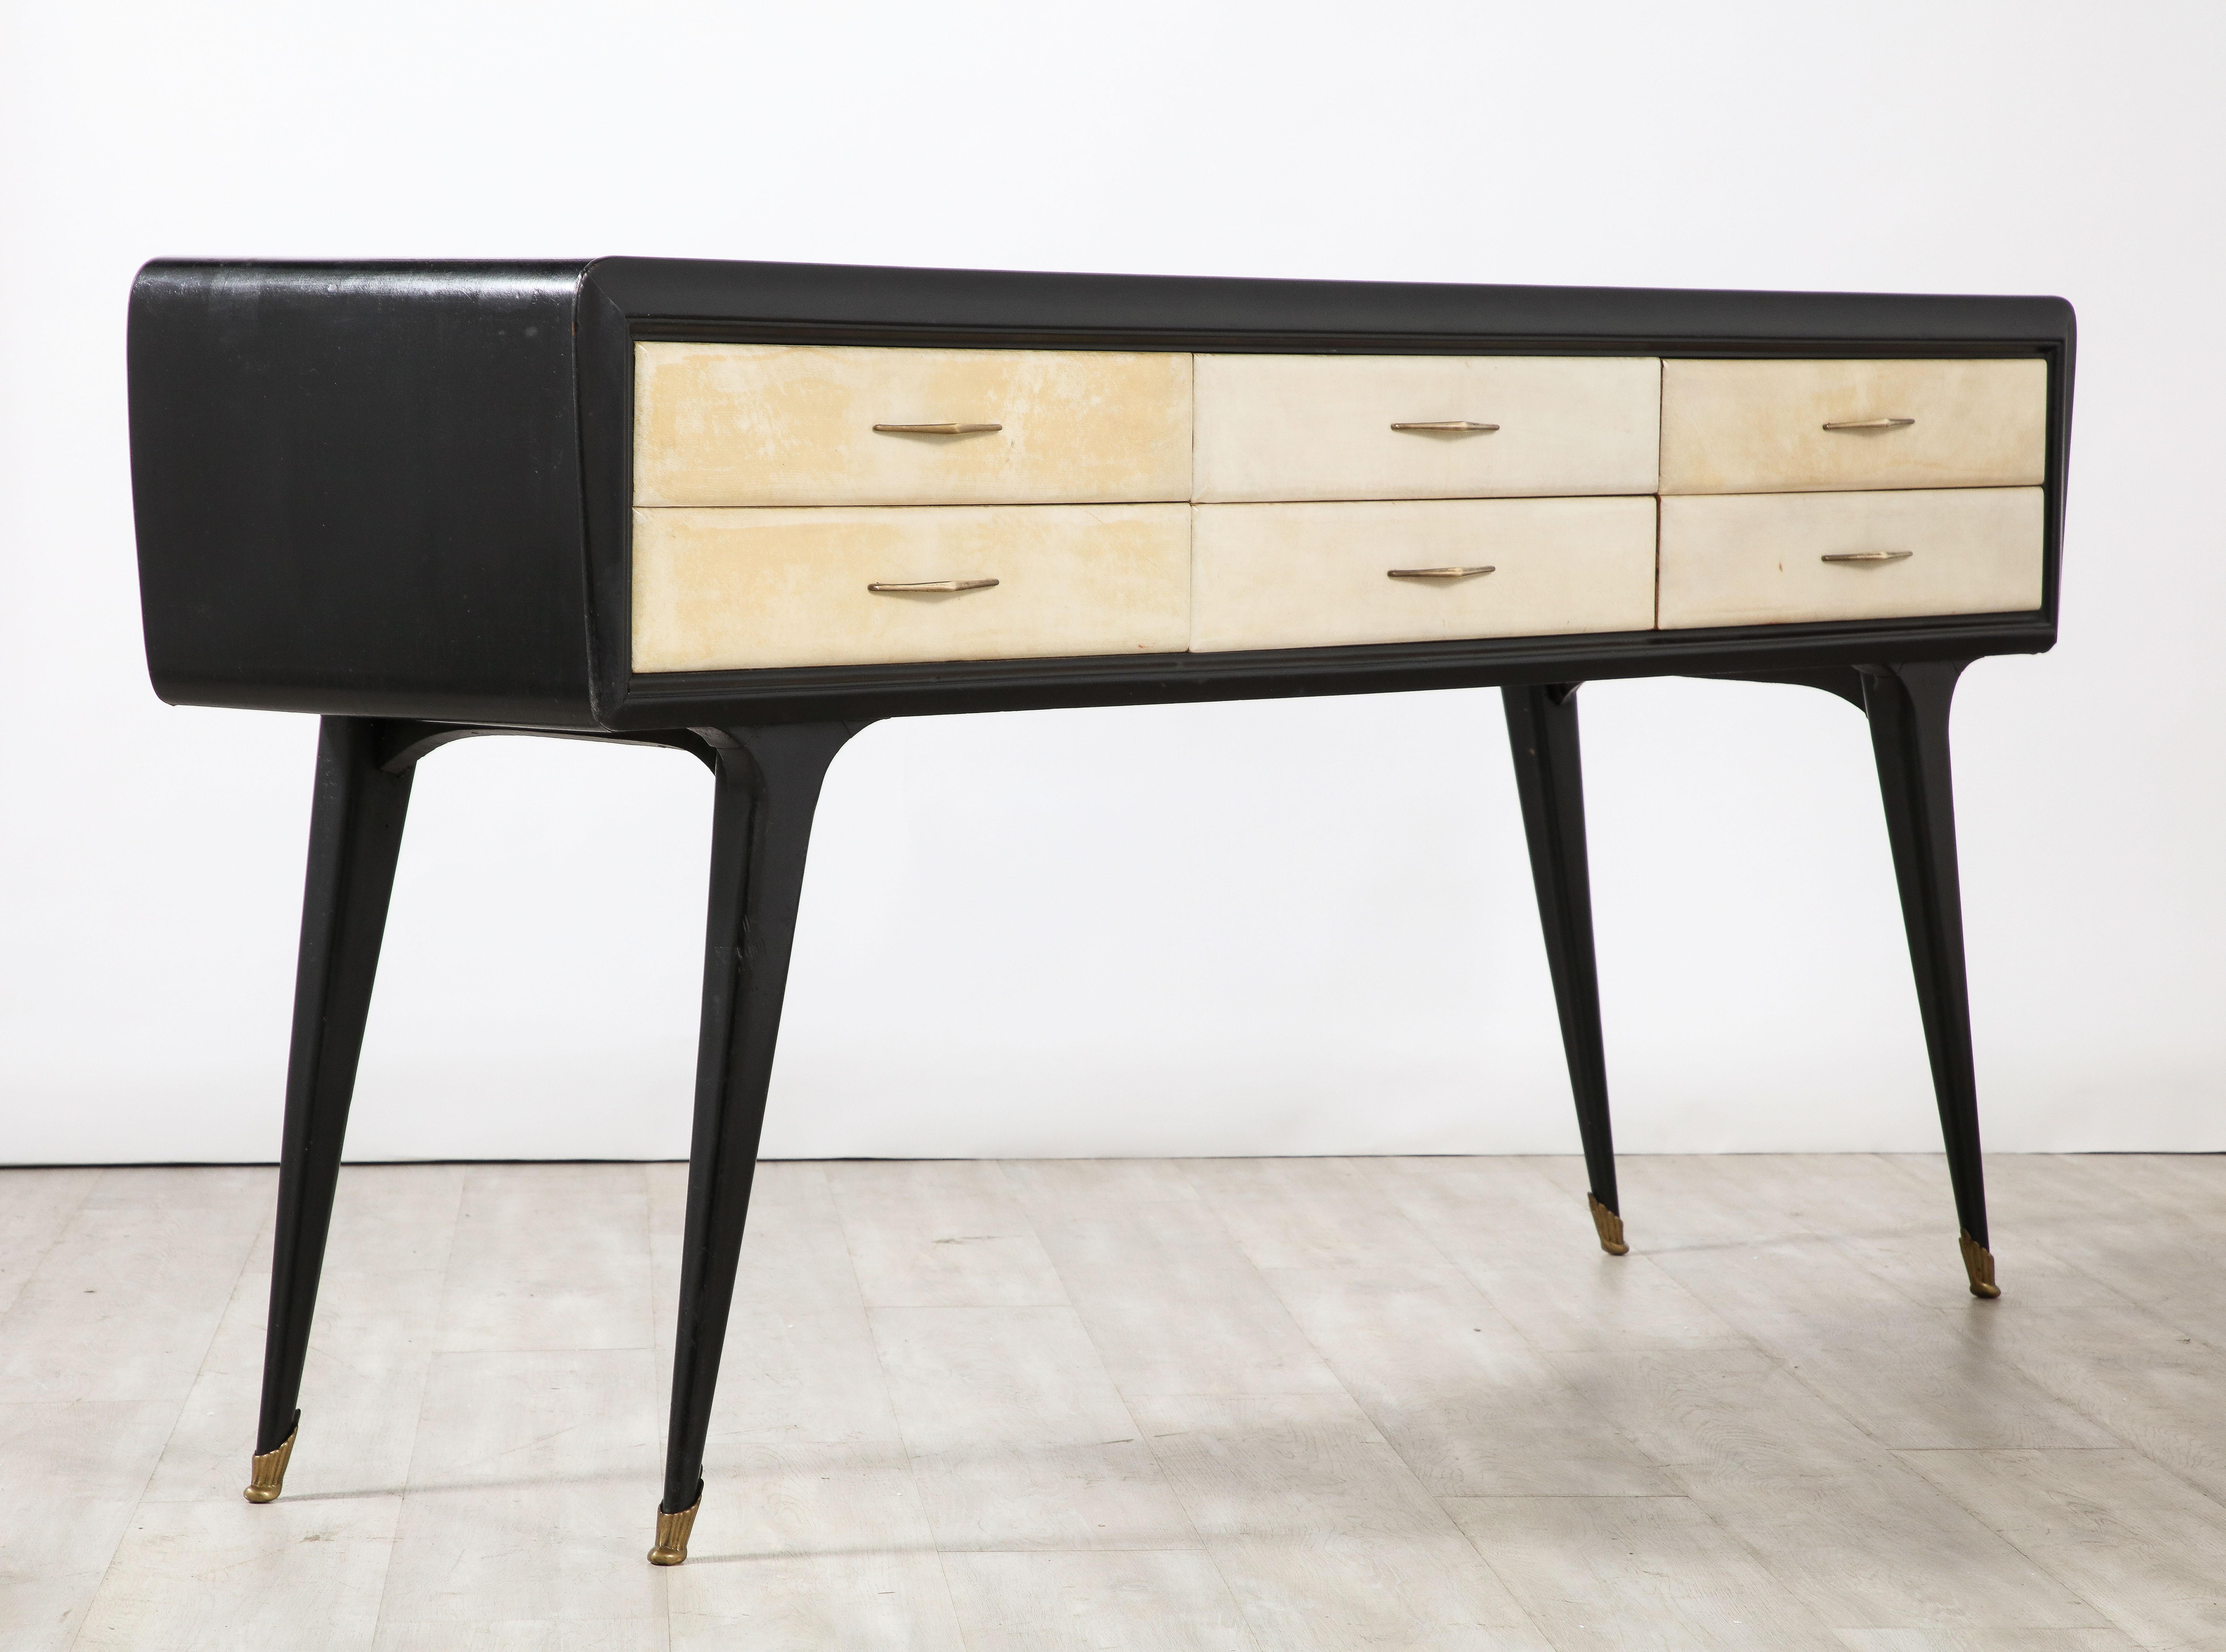 Italian Art Deco Ebonized and Vellum Sideboard with Inset Glass Top, circa 1940 For Sale 11